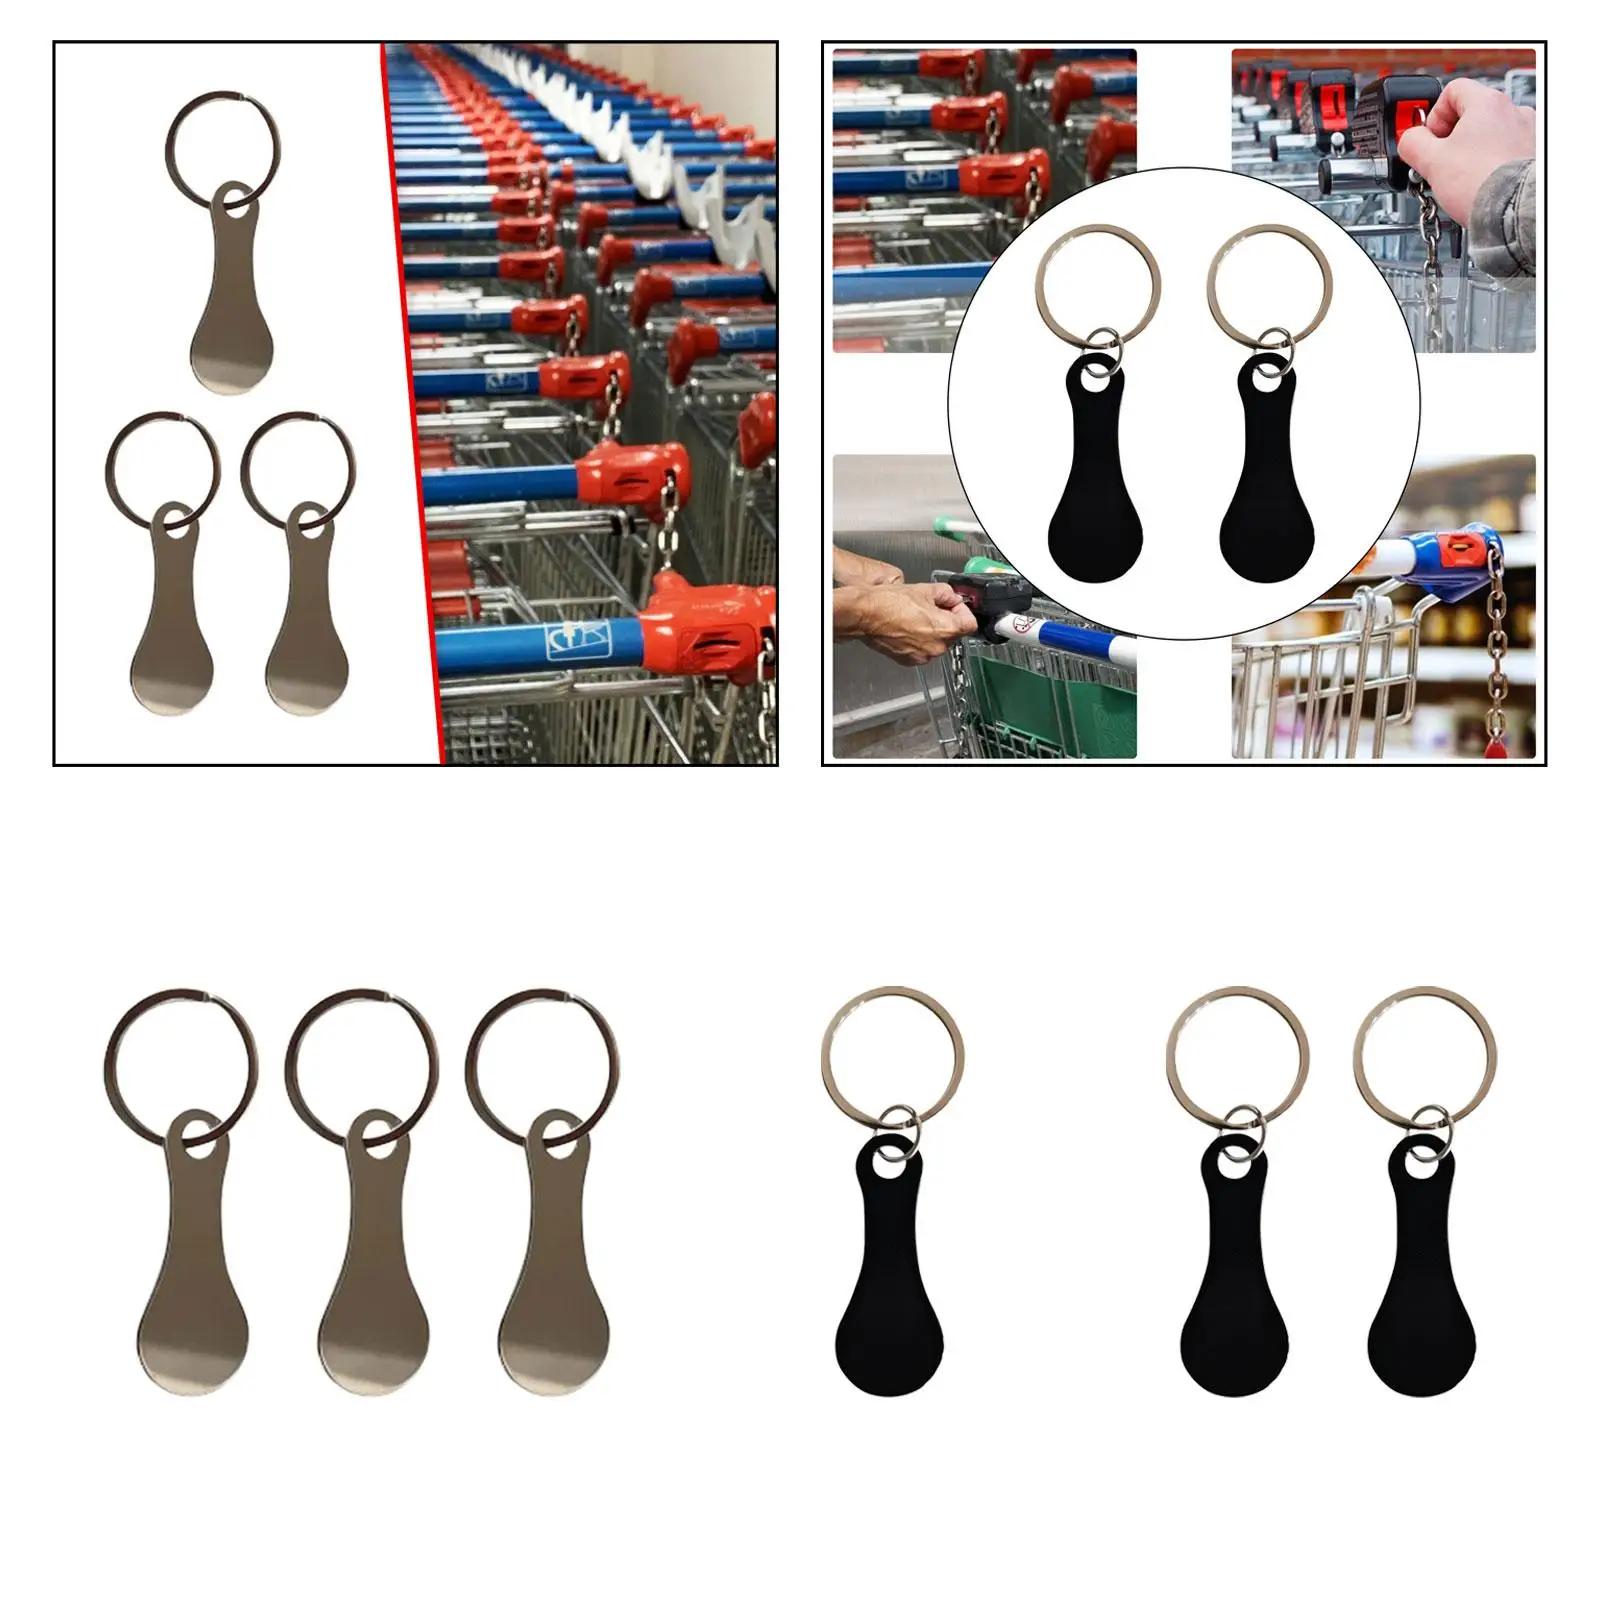 Shopping Trolley Tokens Shopping Trolley Removers Removable Necklace Dangle Decorative Metal Release Keys Coin Holder Keychains